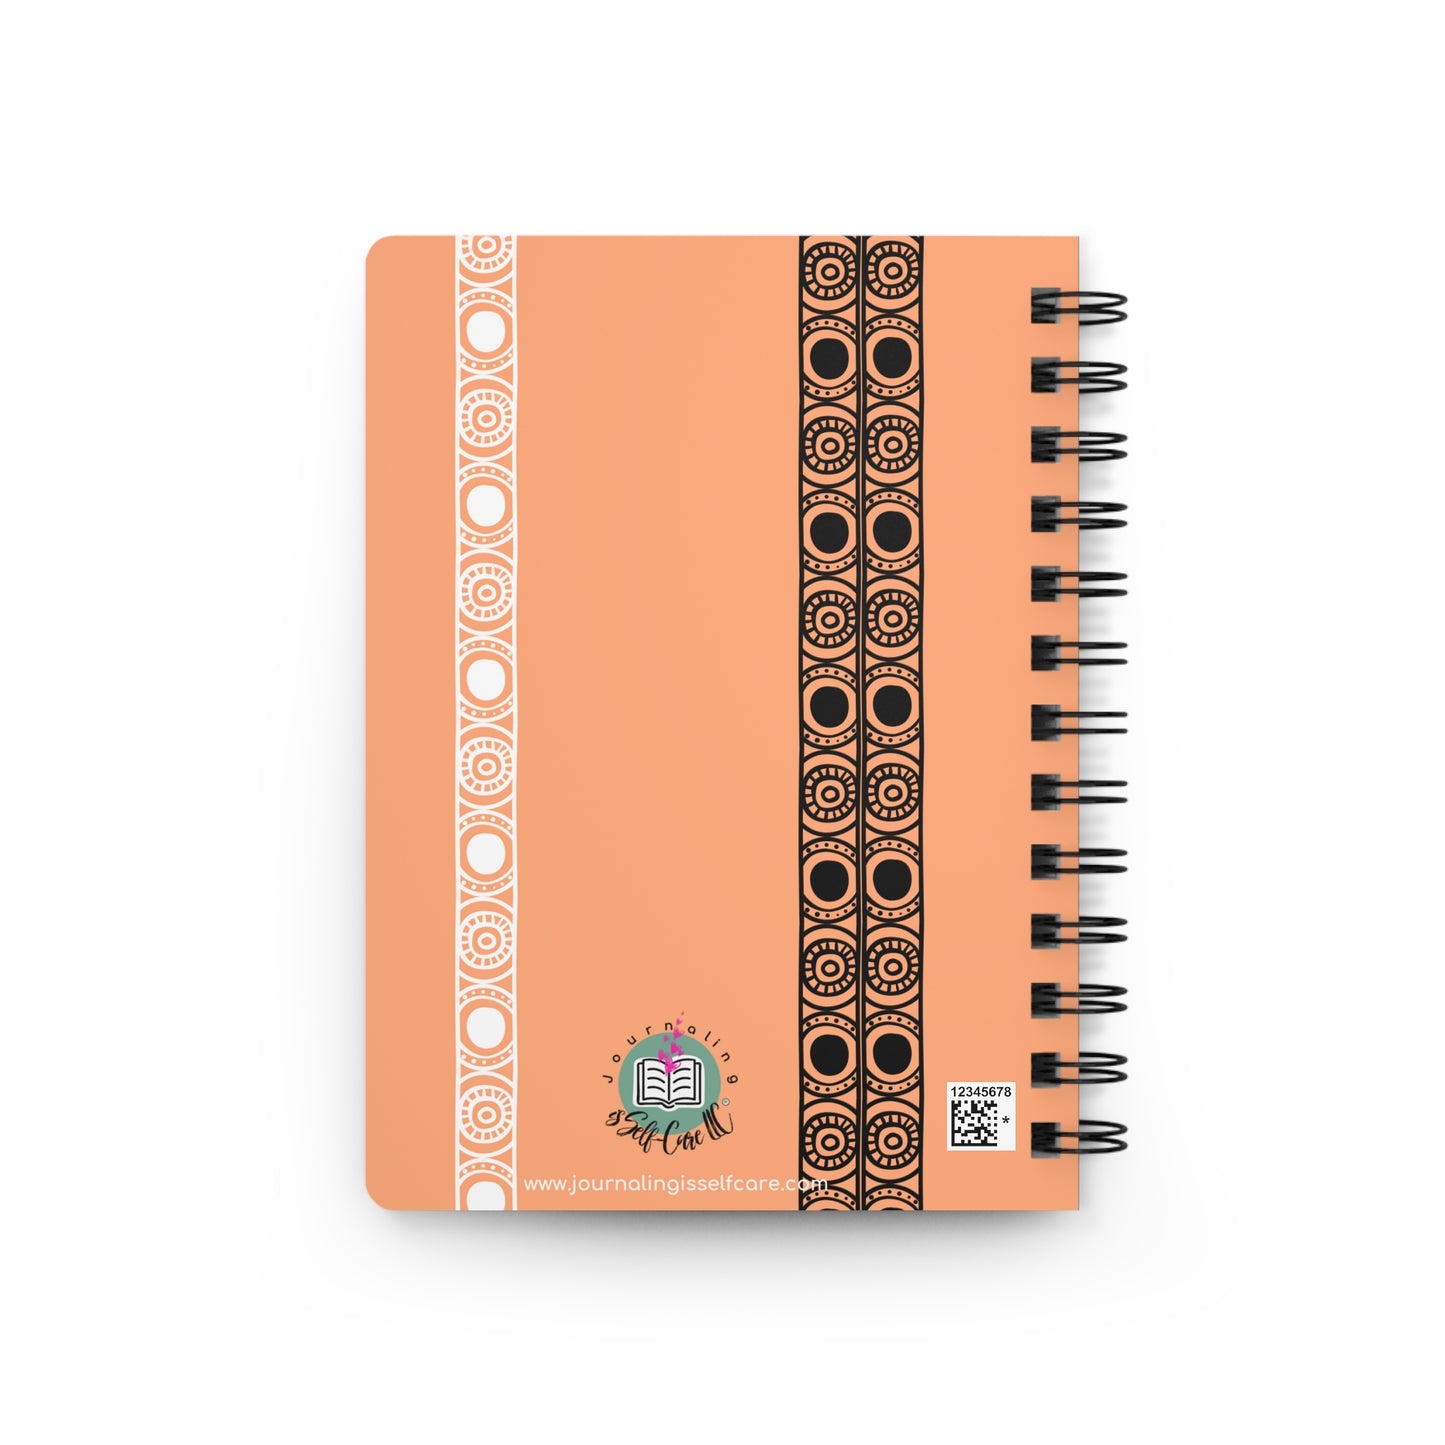 A "Manifest That Shit" manifesting journal with a black and orange design.